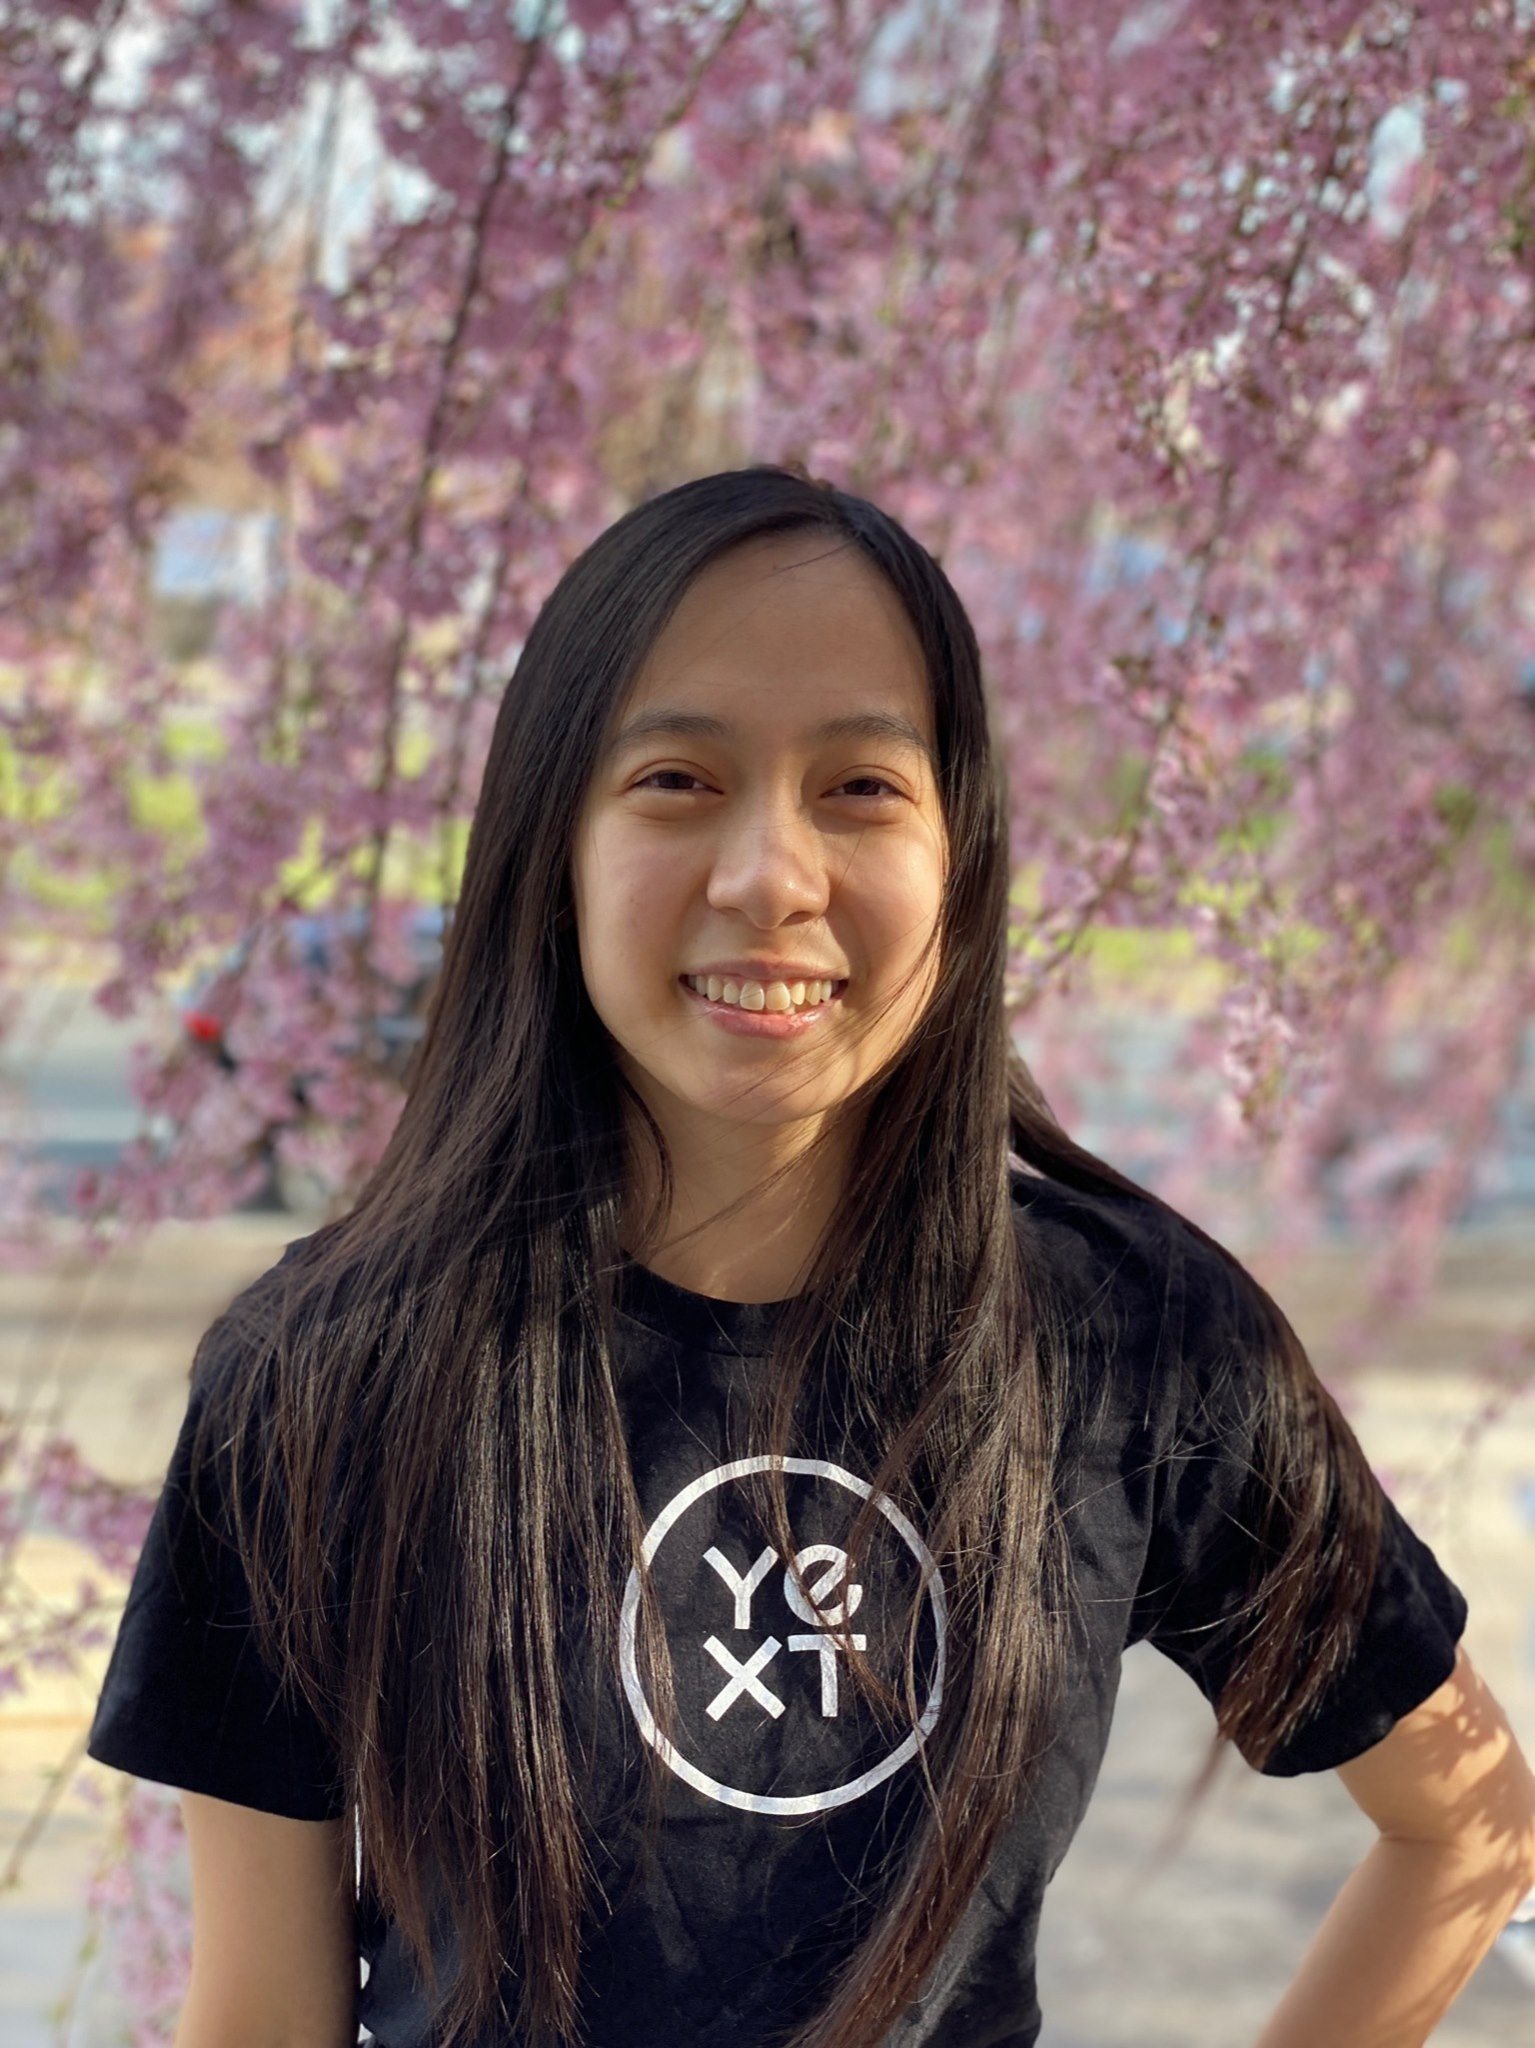 profile picture of Tiffany Trinh, smiling with long black/brown hair, black "YEXT" t-shirt, and pink cherry blossoms blooming in the background